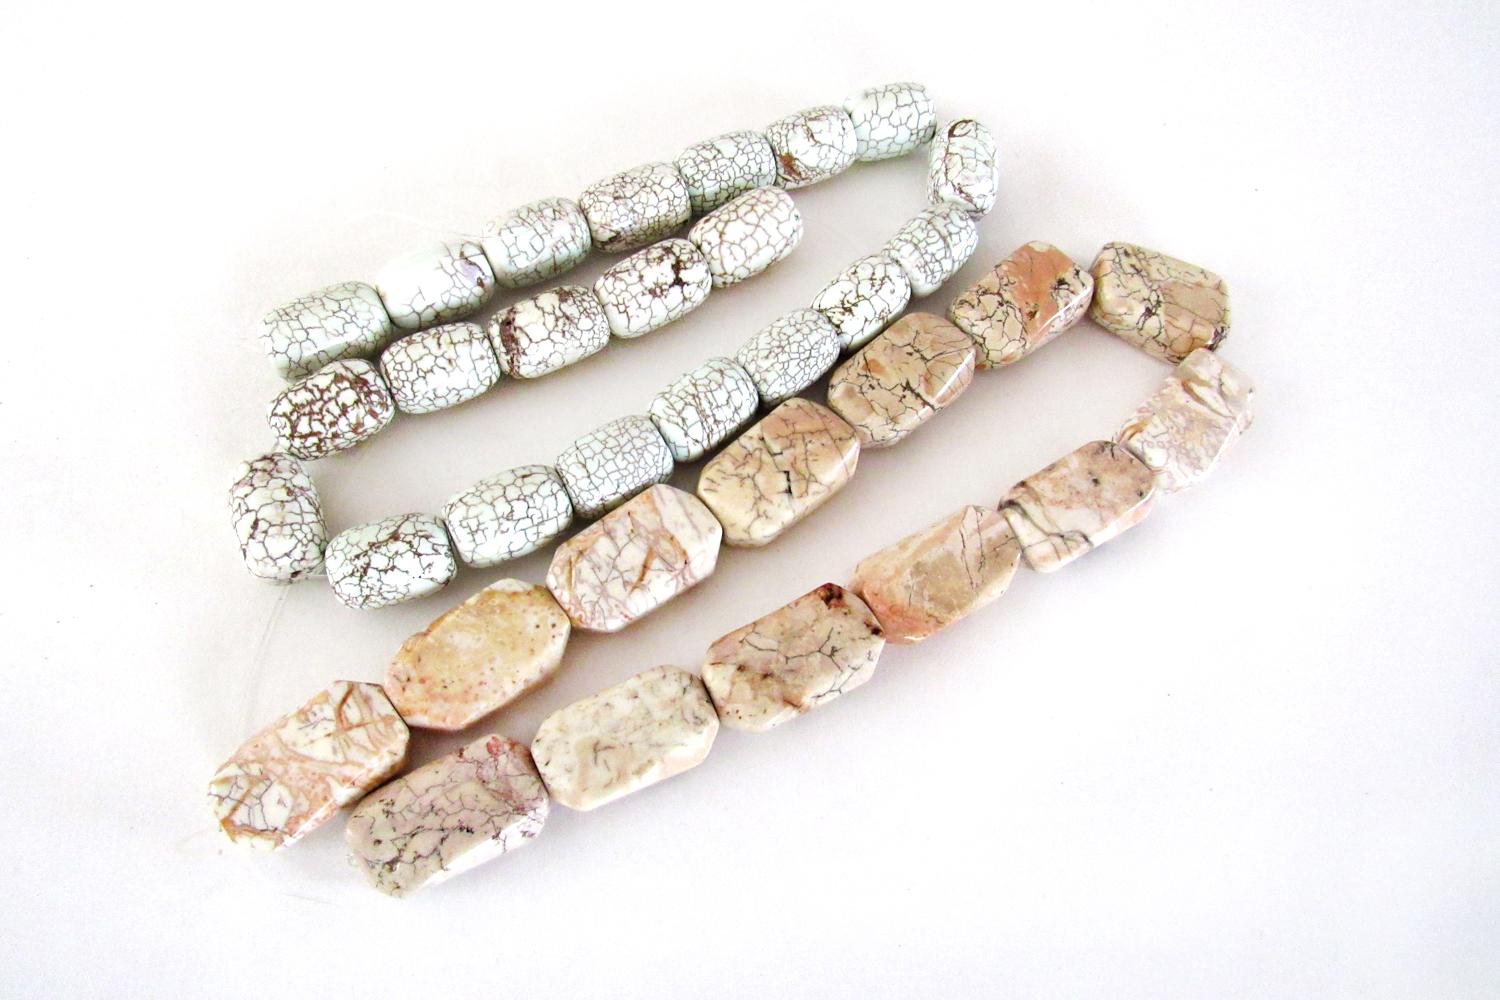 Magnesite Stone Bead Strands - Set of 2 full strands for Jewelry Making / Beading / Craft Supply - Earth Tone Colors